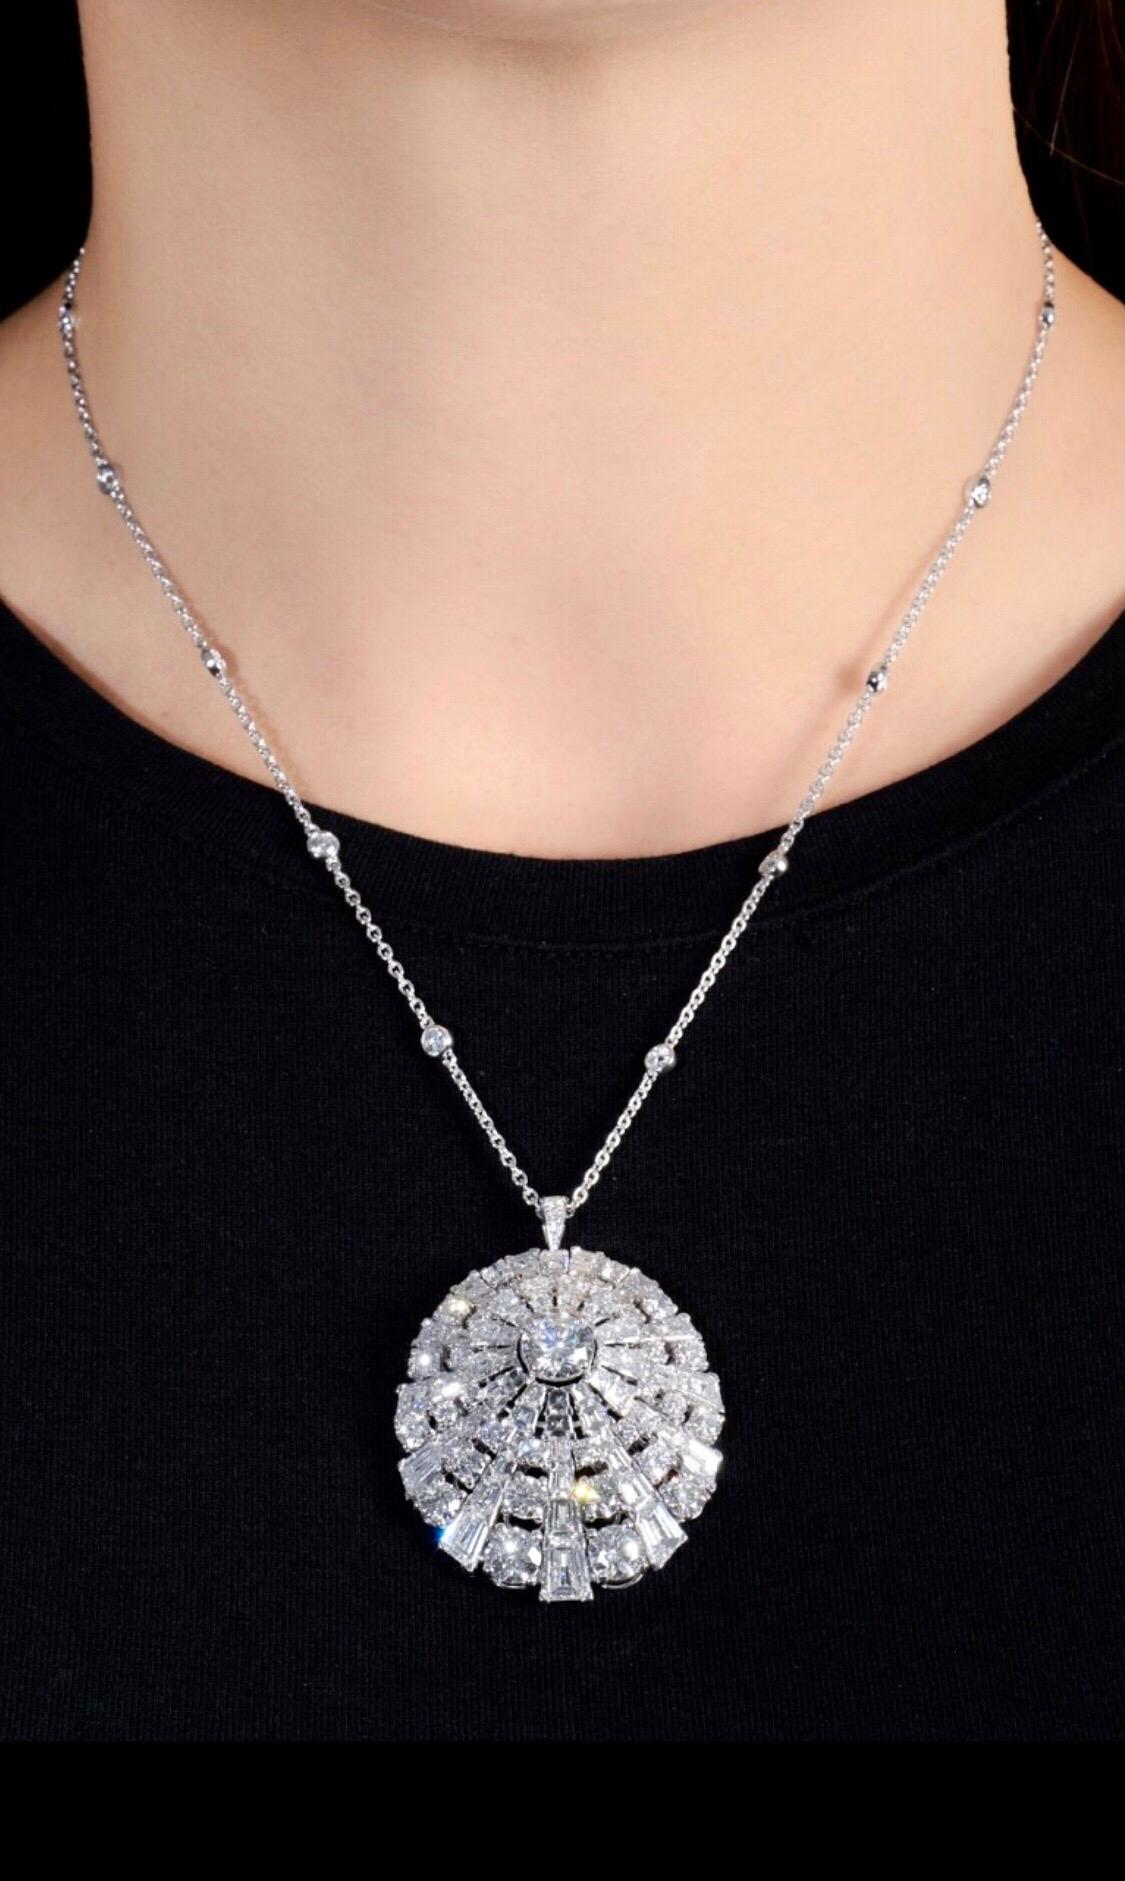 An incredible Graff diamond necklace showcasing round brilliant cut diamonds and baguette diamonds in 18k white gold. The necklace is accompanied by GIA stating that the central round brilliant-cut diamond weighing 1.52 carats, G Color, VVS2